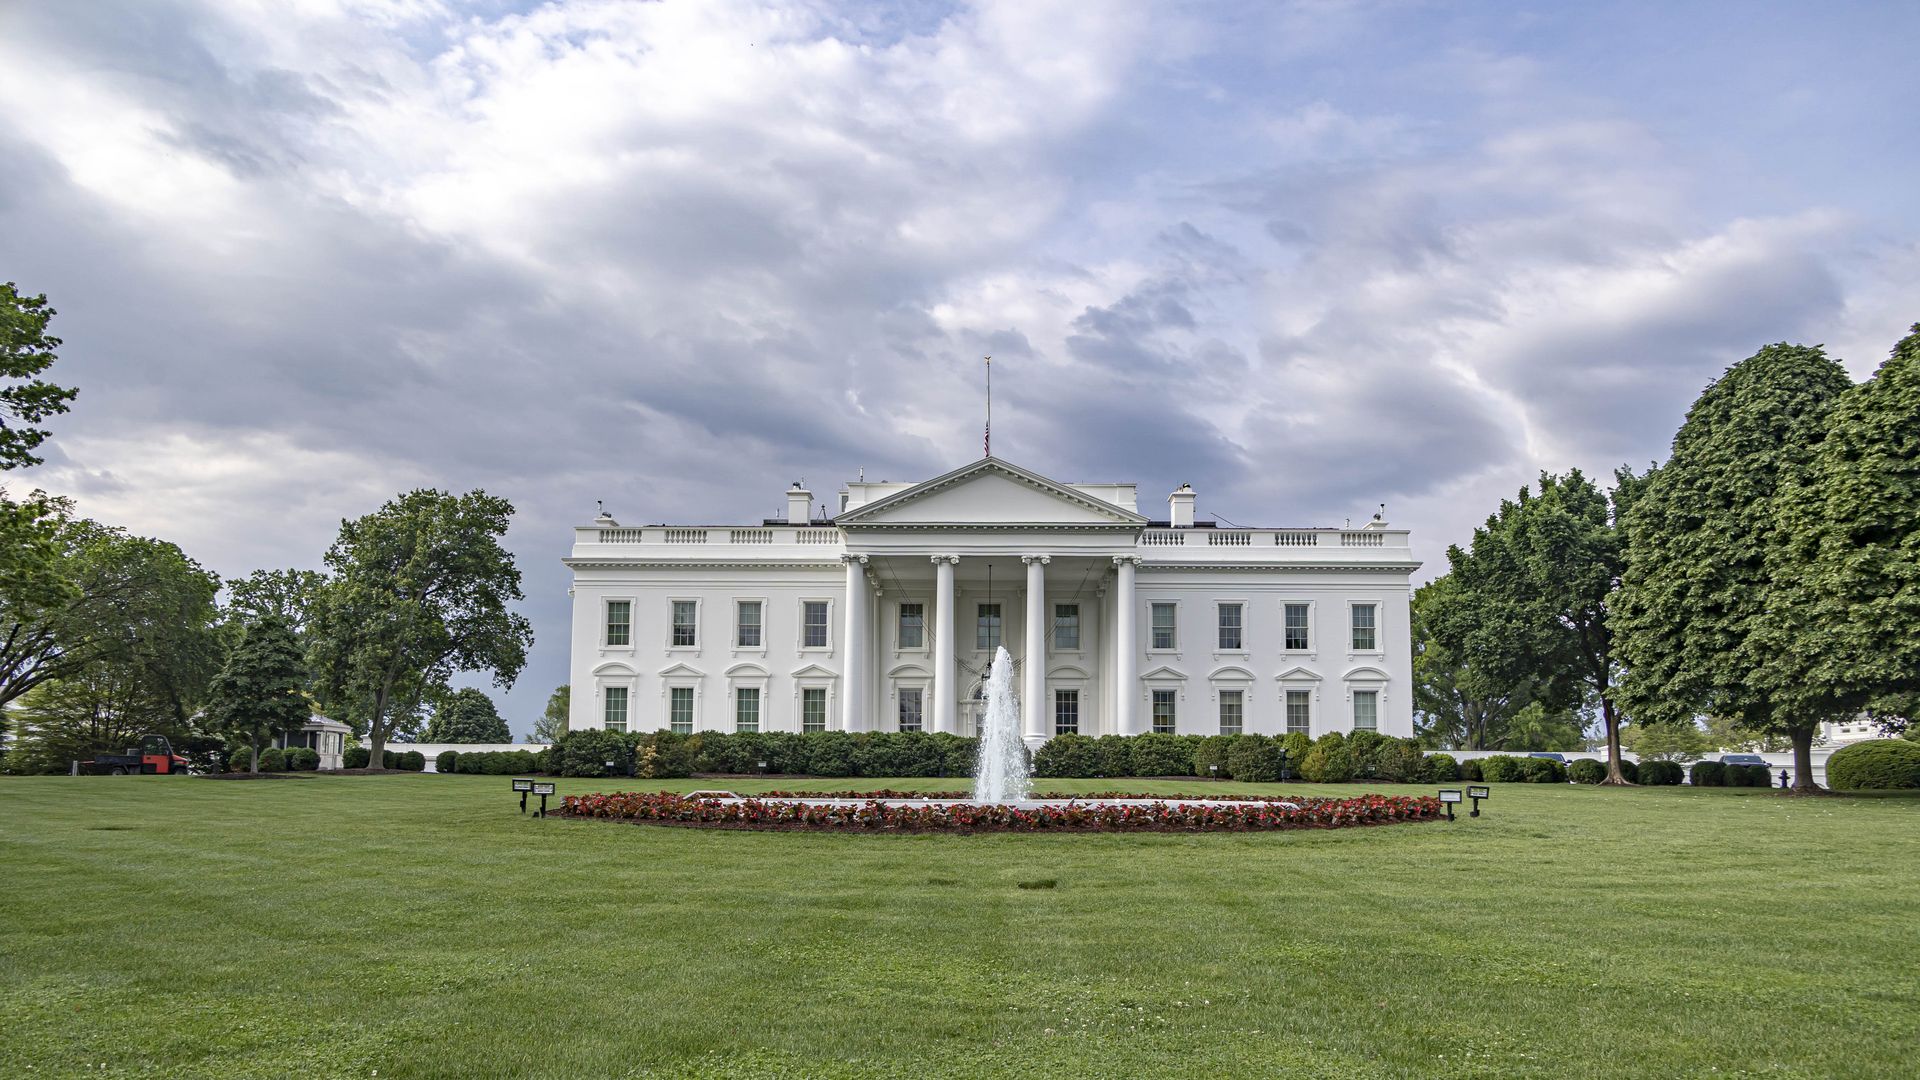 Image of the White House 